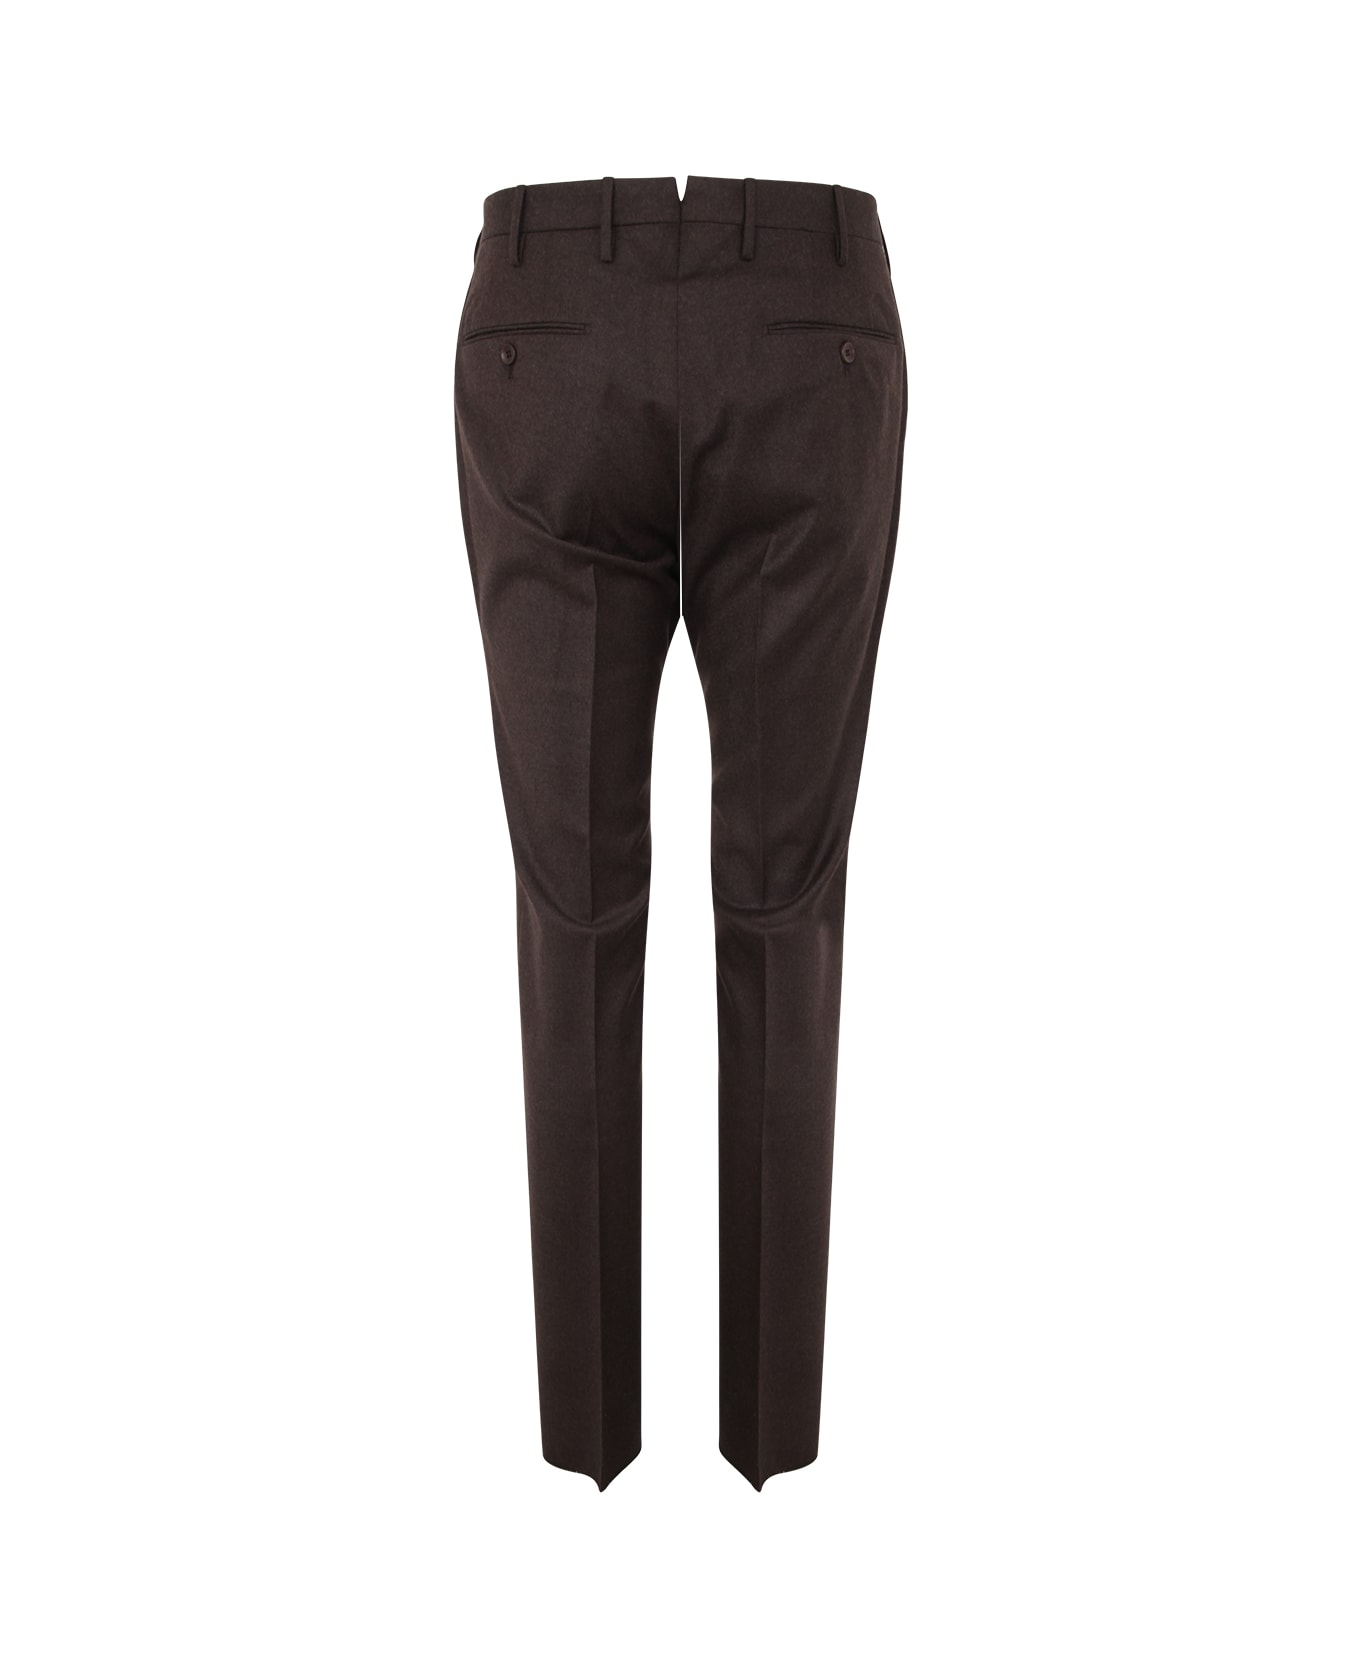 Incotex Flannel Classic Trousers - Chestnut